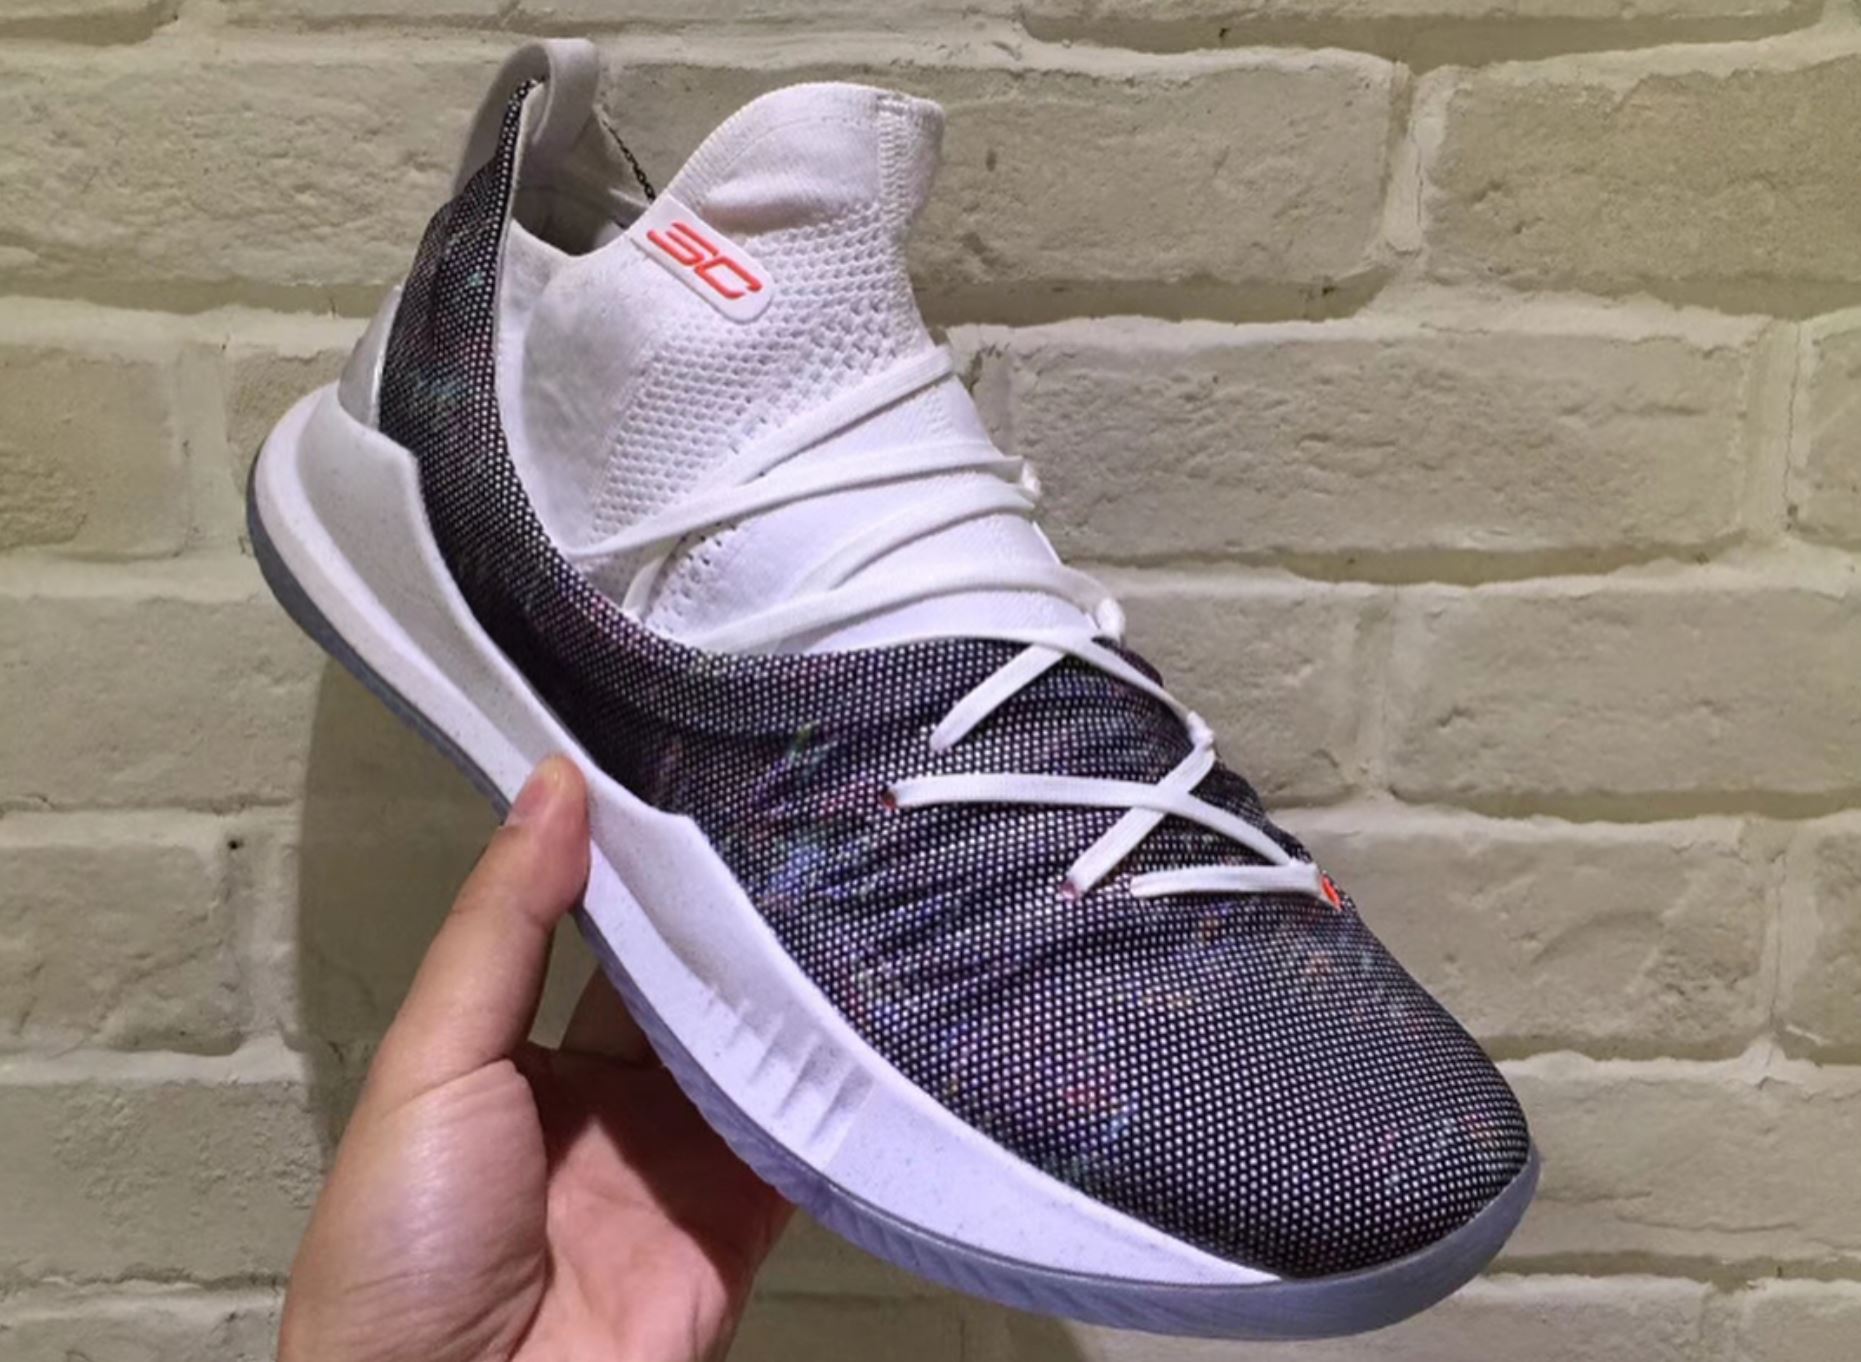 Curry 5 Has Surfaced Online Ahead 